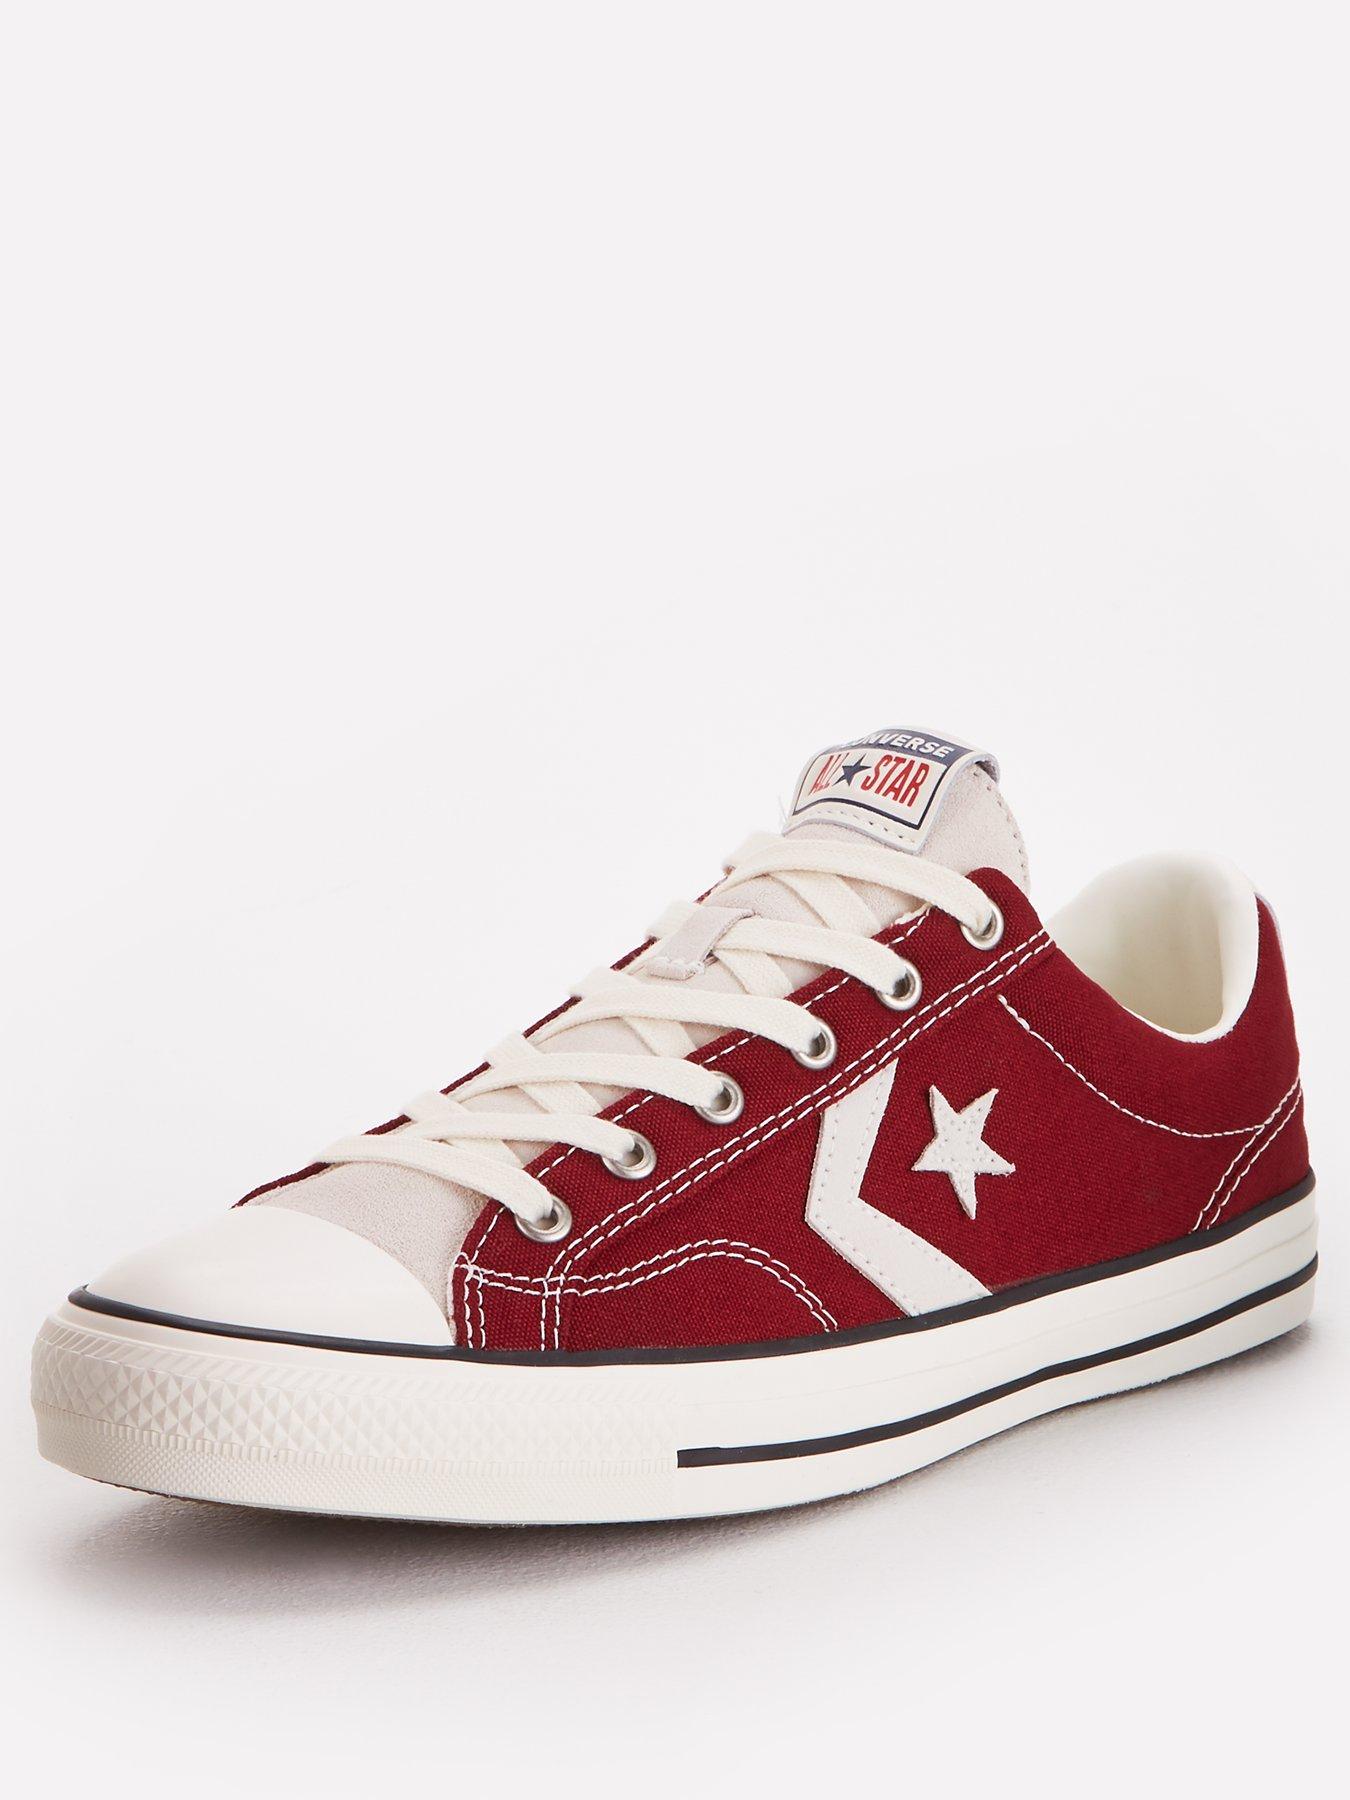 converse star player size 6